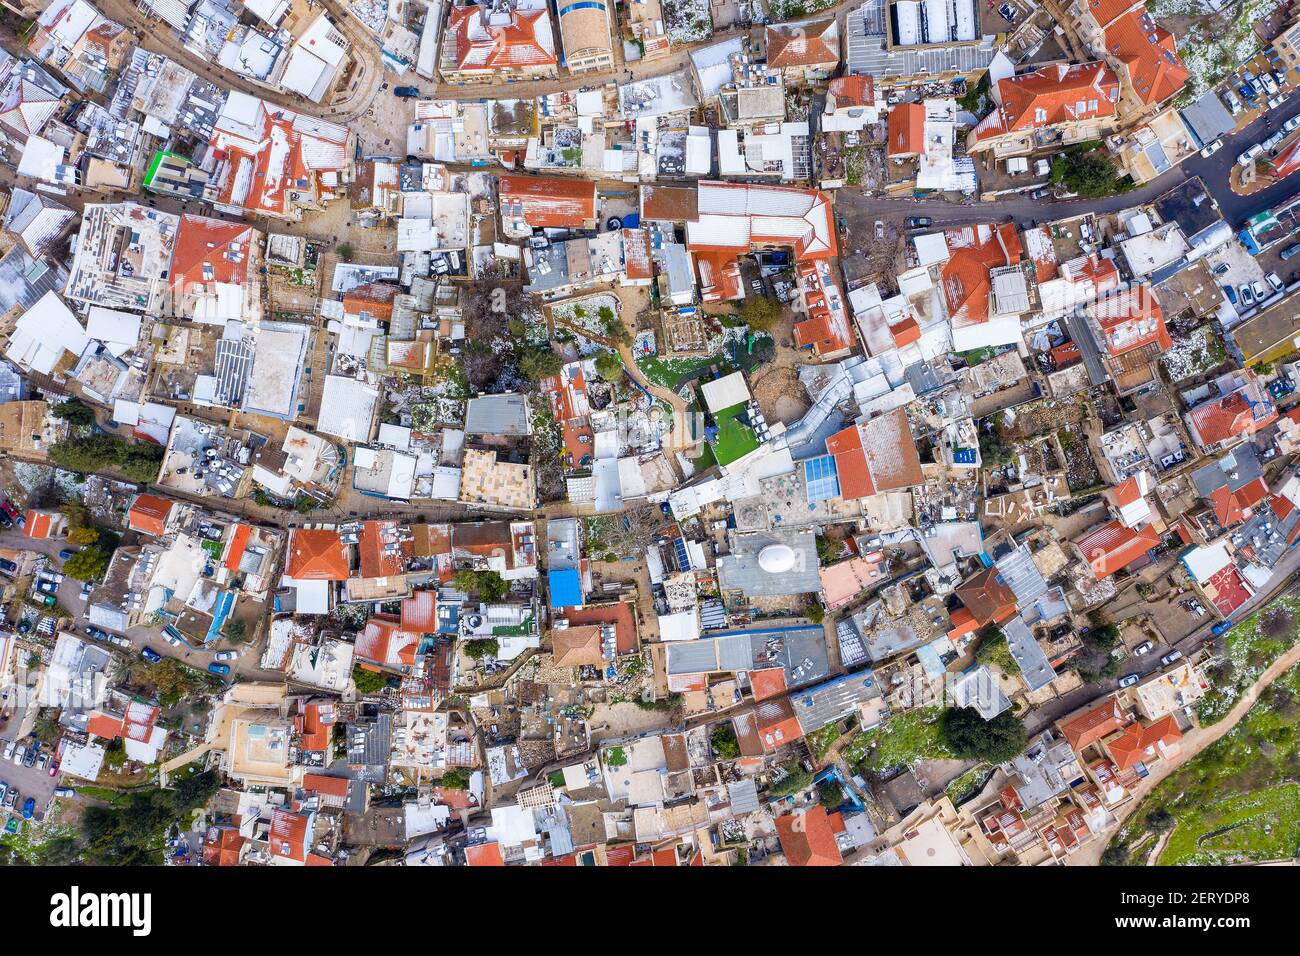 Safed old Jewish quarter houses, with light snow covering rooftops, Aerial view. Stock Photo